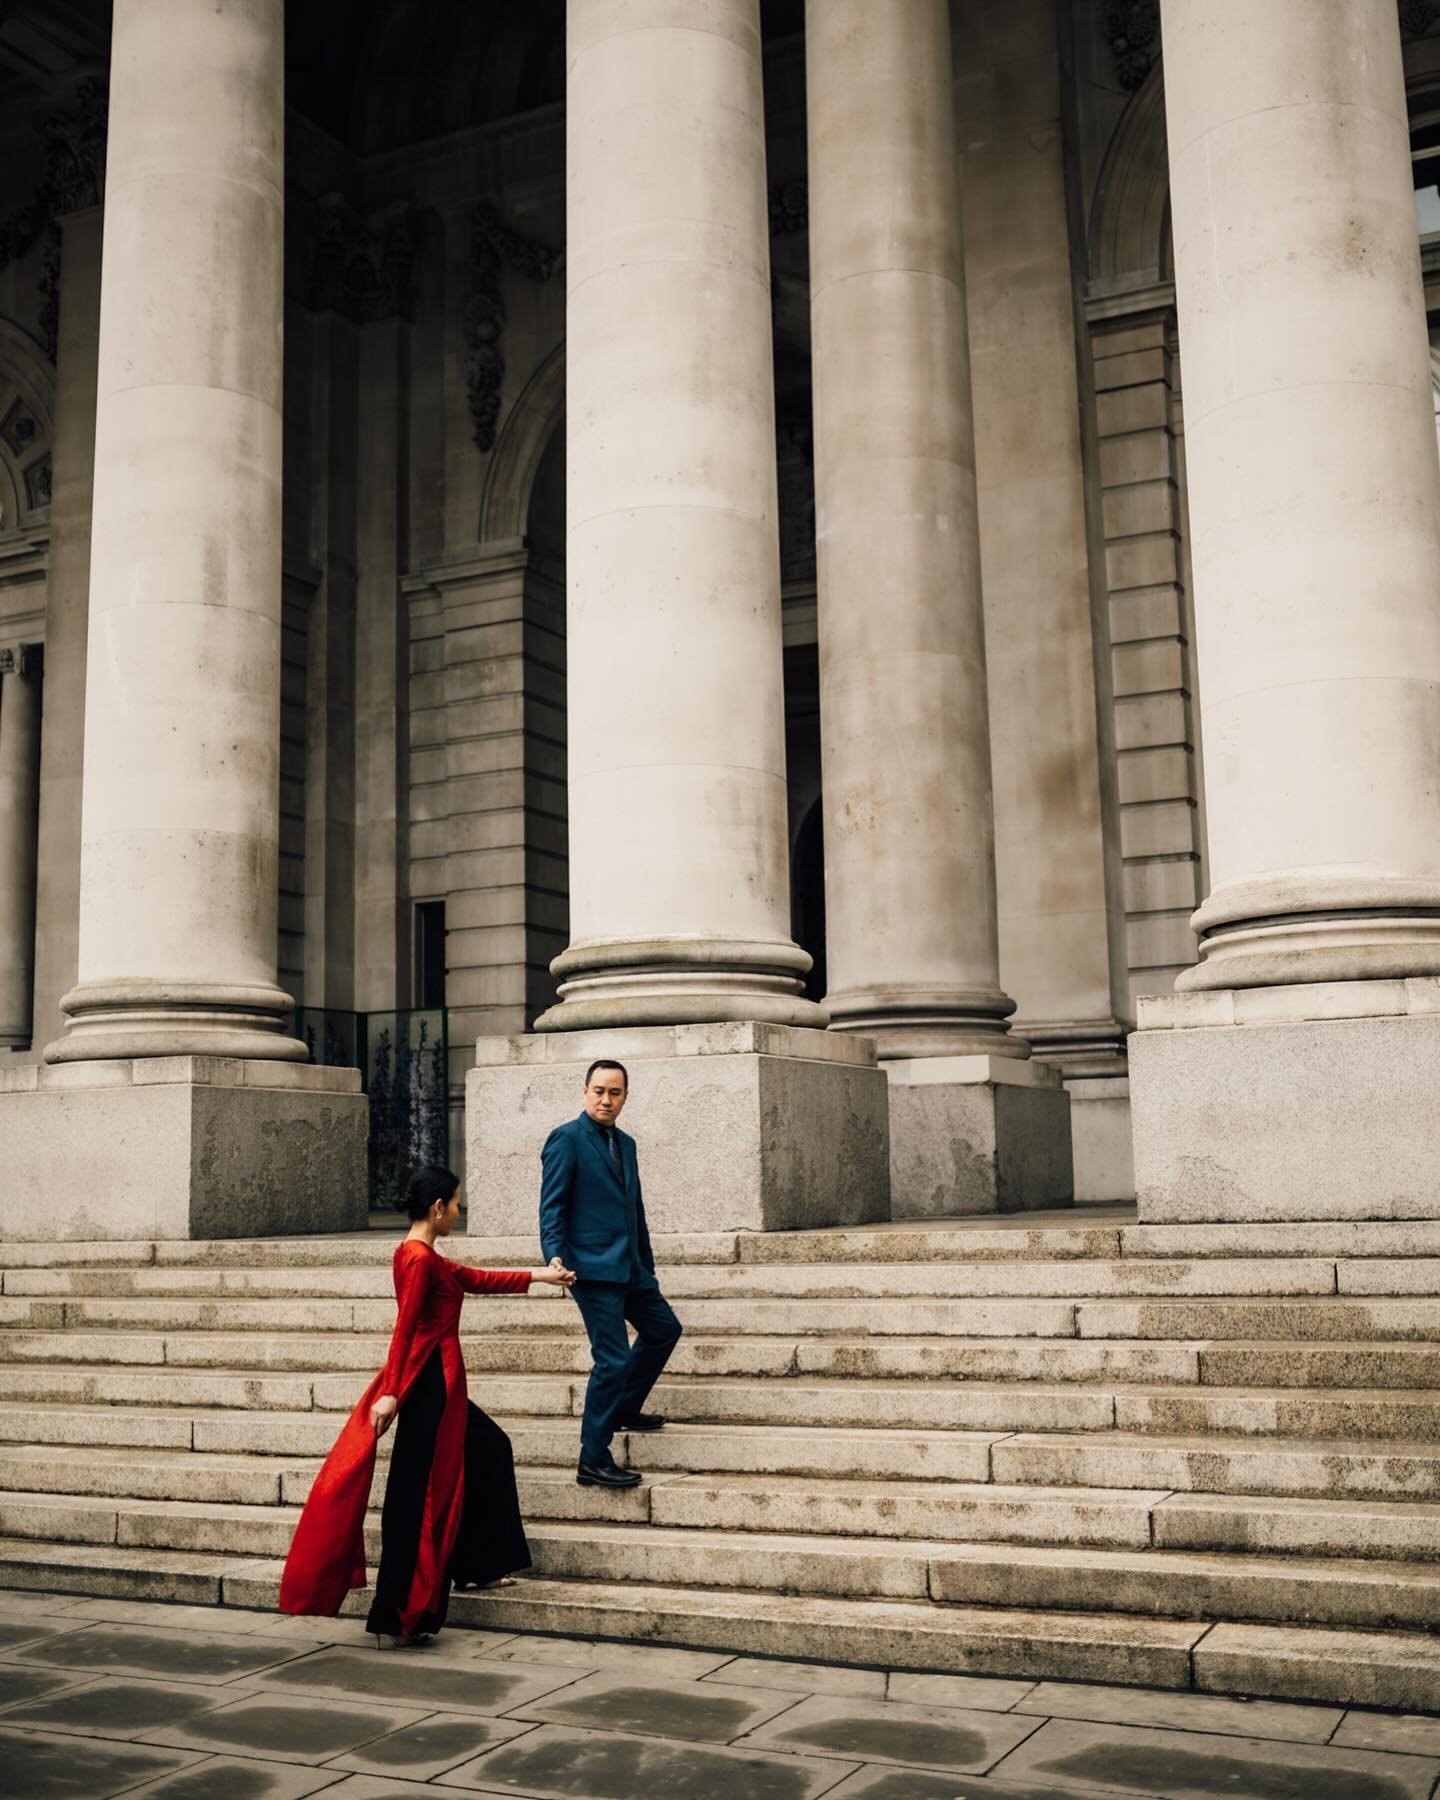 V&amp;T in London 🤍 an engagement shoot in the city

#londonengagementphotographer #londonengagement #citylovers #gettingmarried